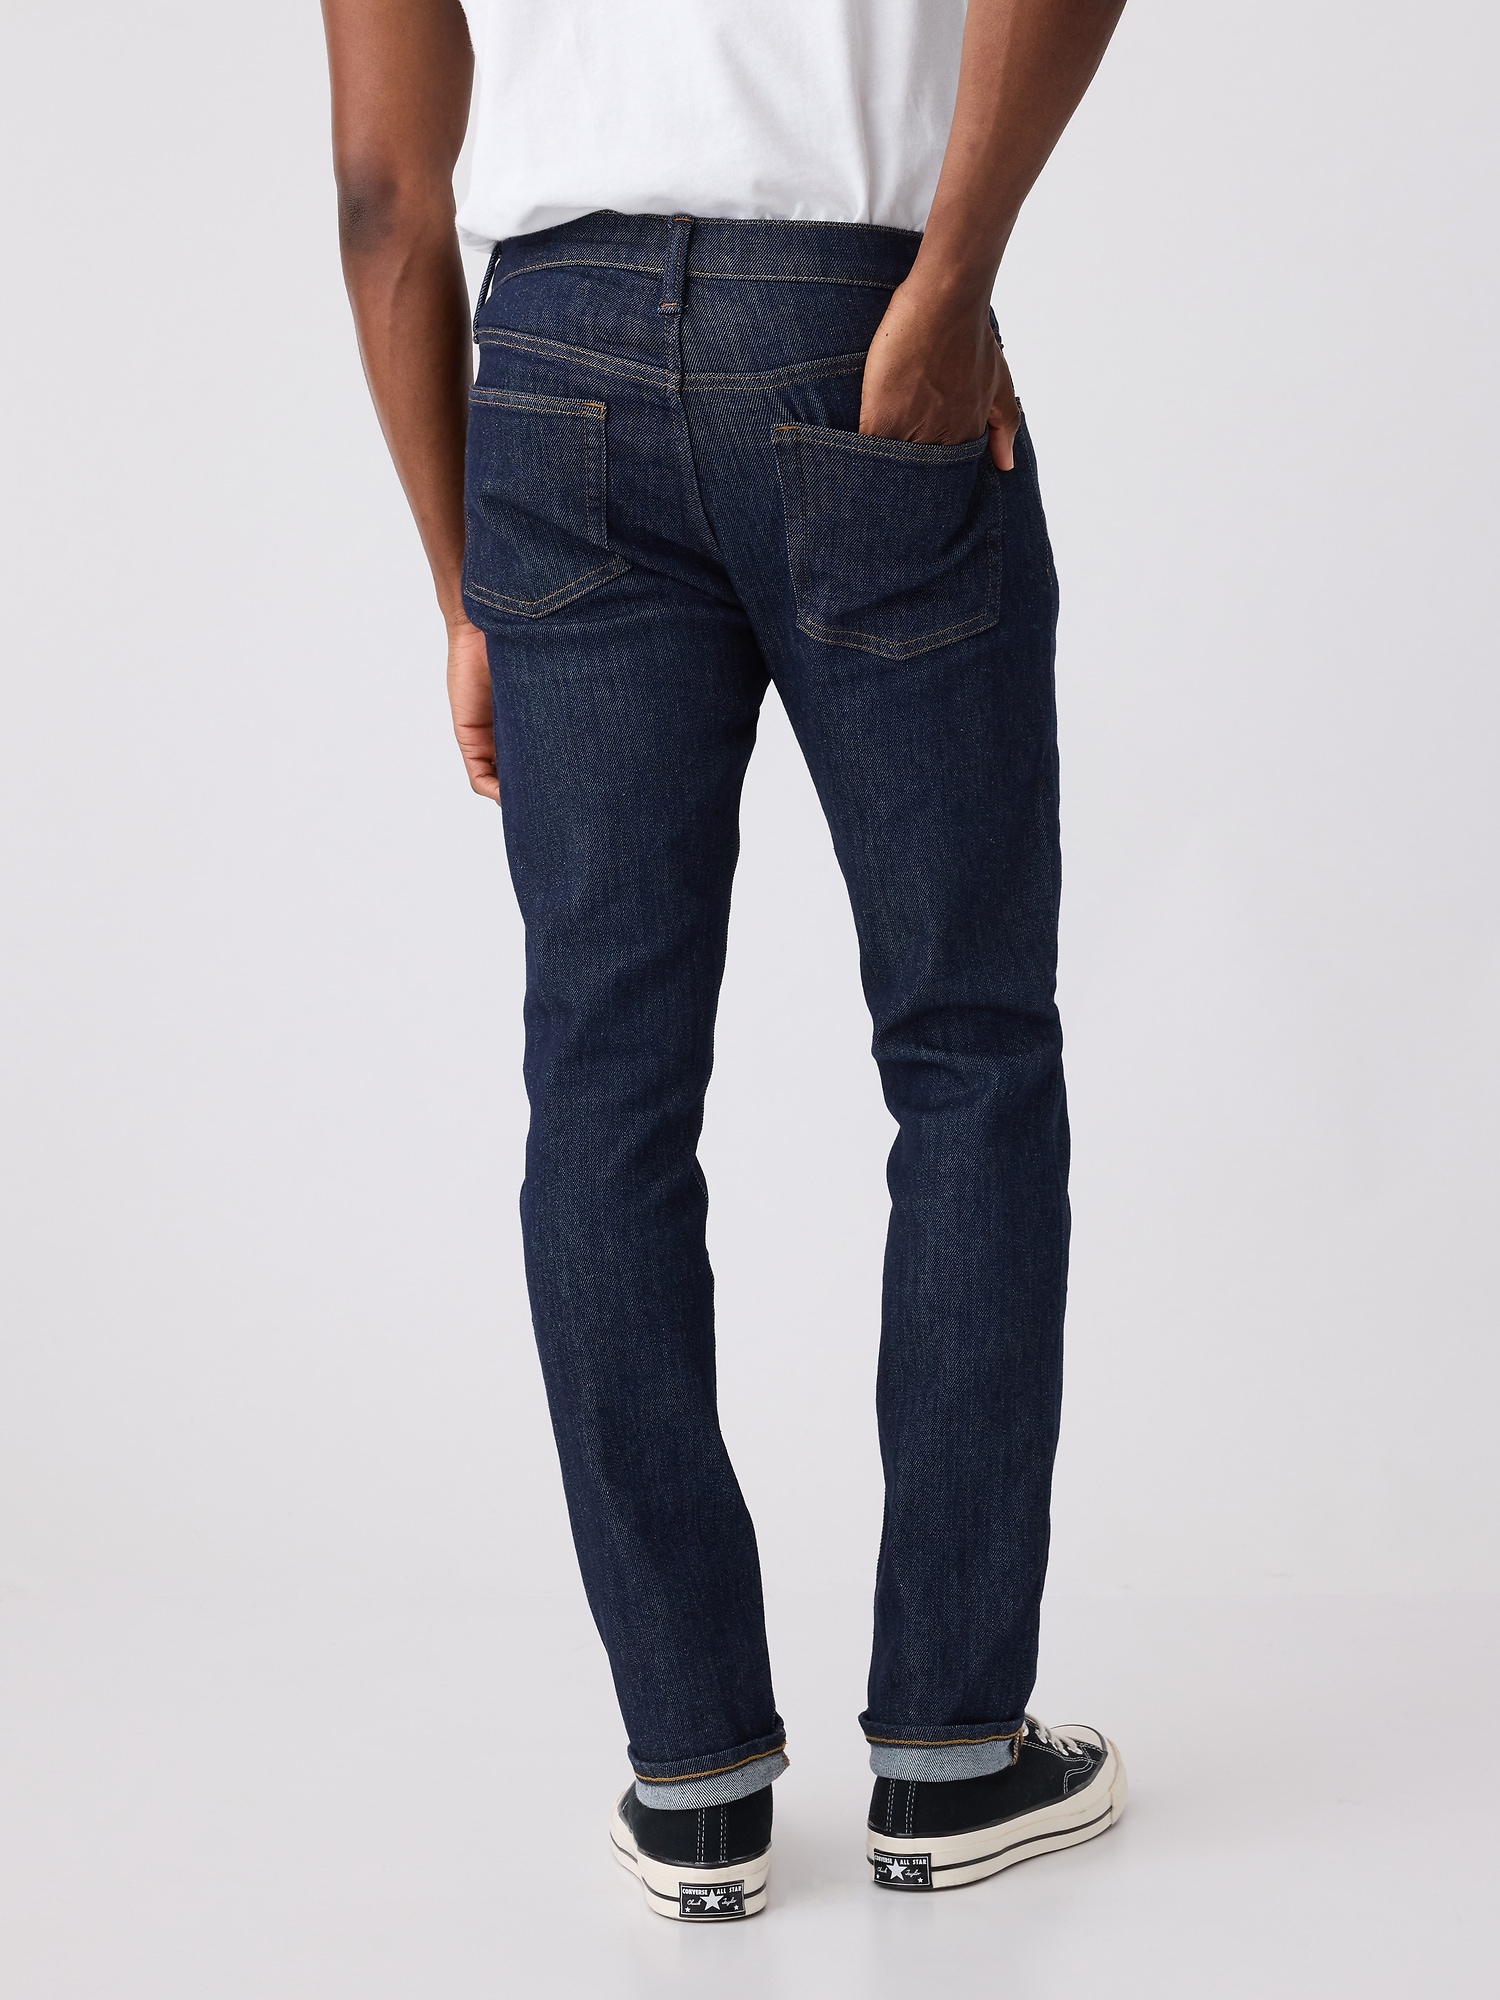 Gap Factory Skinny GapFlex Soft Wear Max Jeans with Washwell - ShopStyle